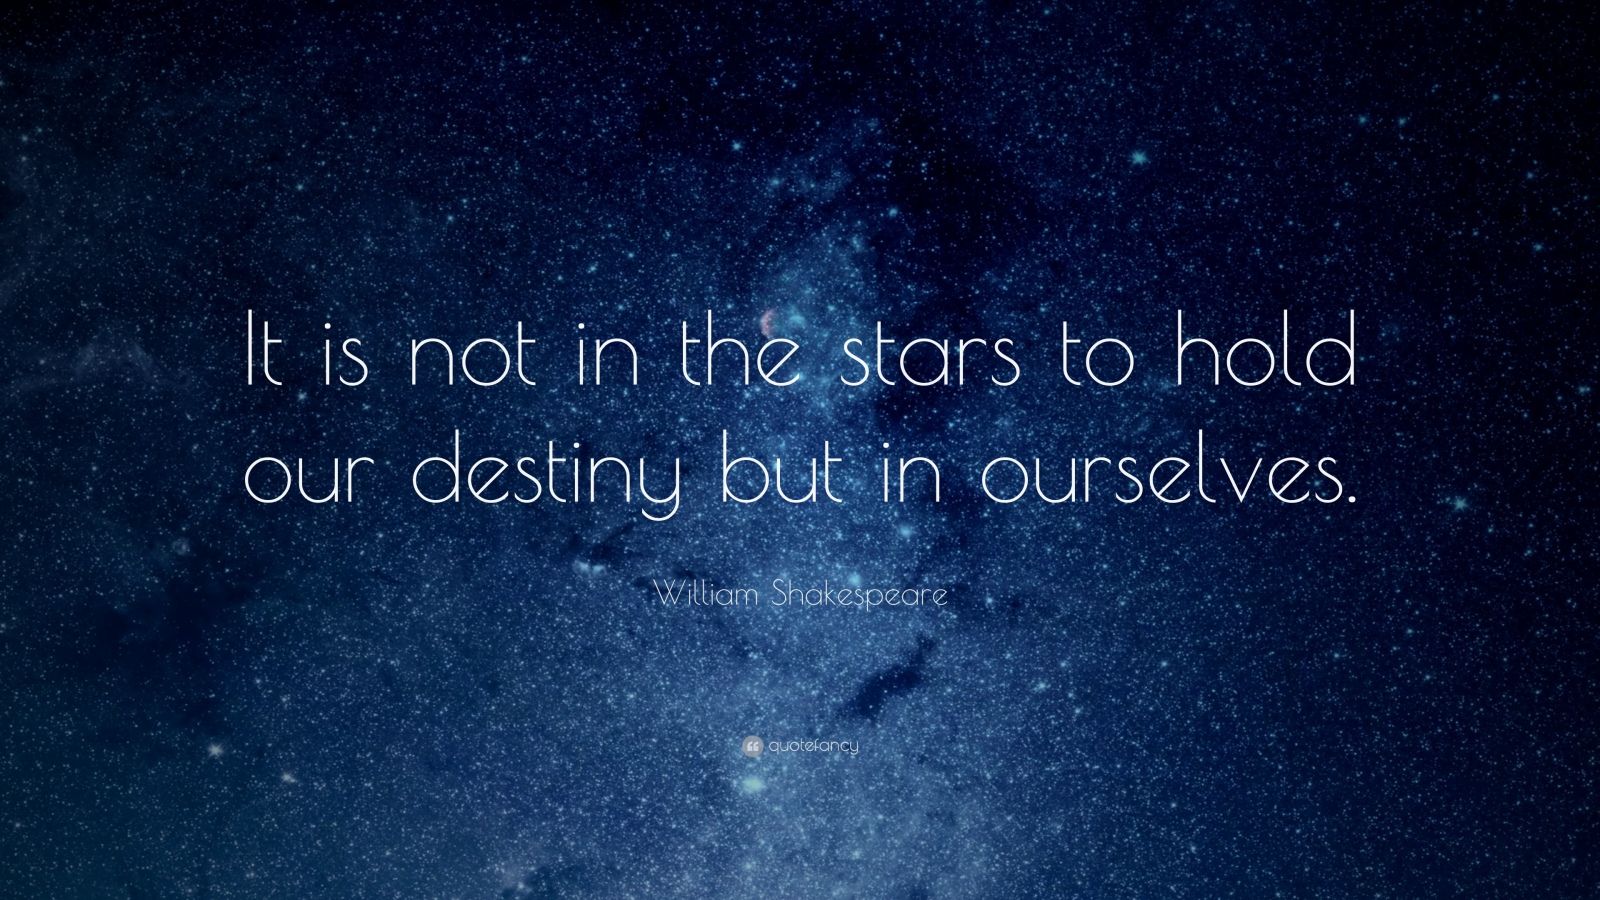 William Shakespeare Quote: “It is not in the stars to hold our destiny